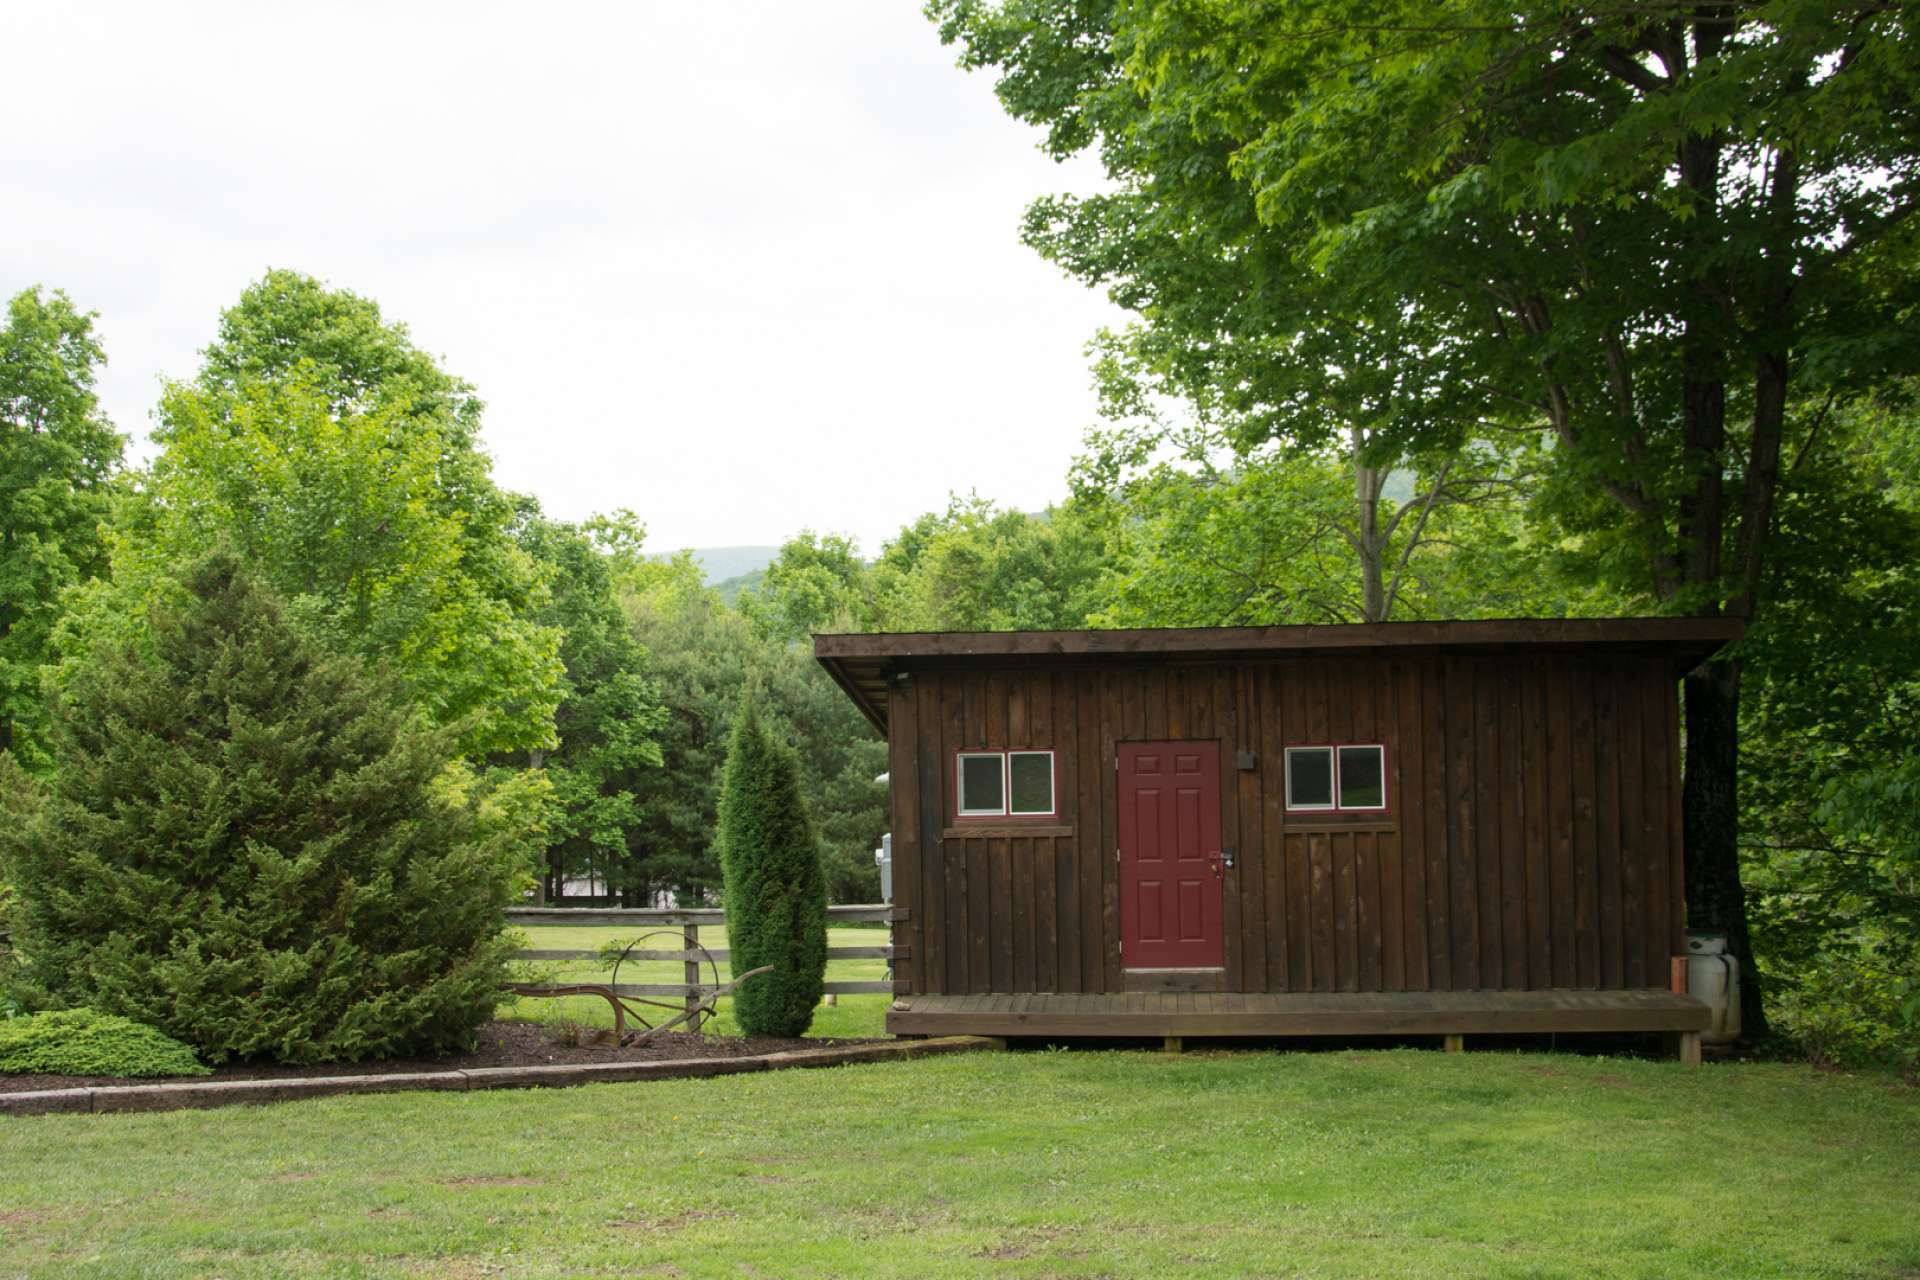 Includes a bunkhouse with a full bath and storage space for outdoor equipment/toys, a second shed which contains the hot water wood stove and also an equipment garage attached to the 2-car garage.